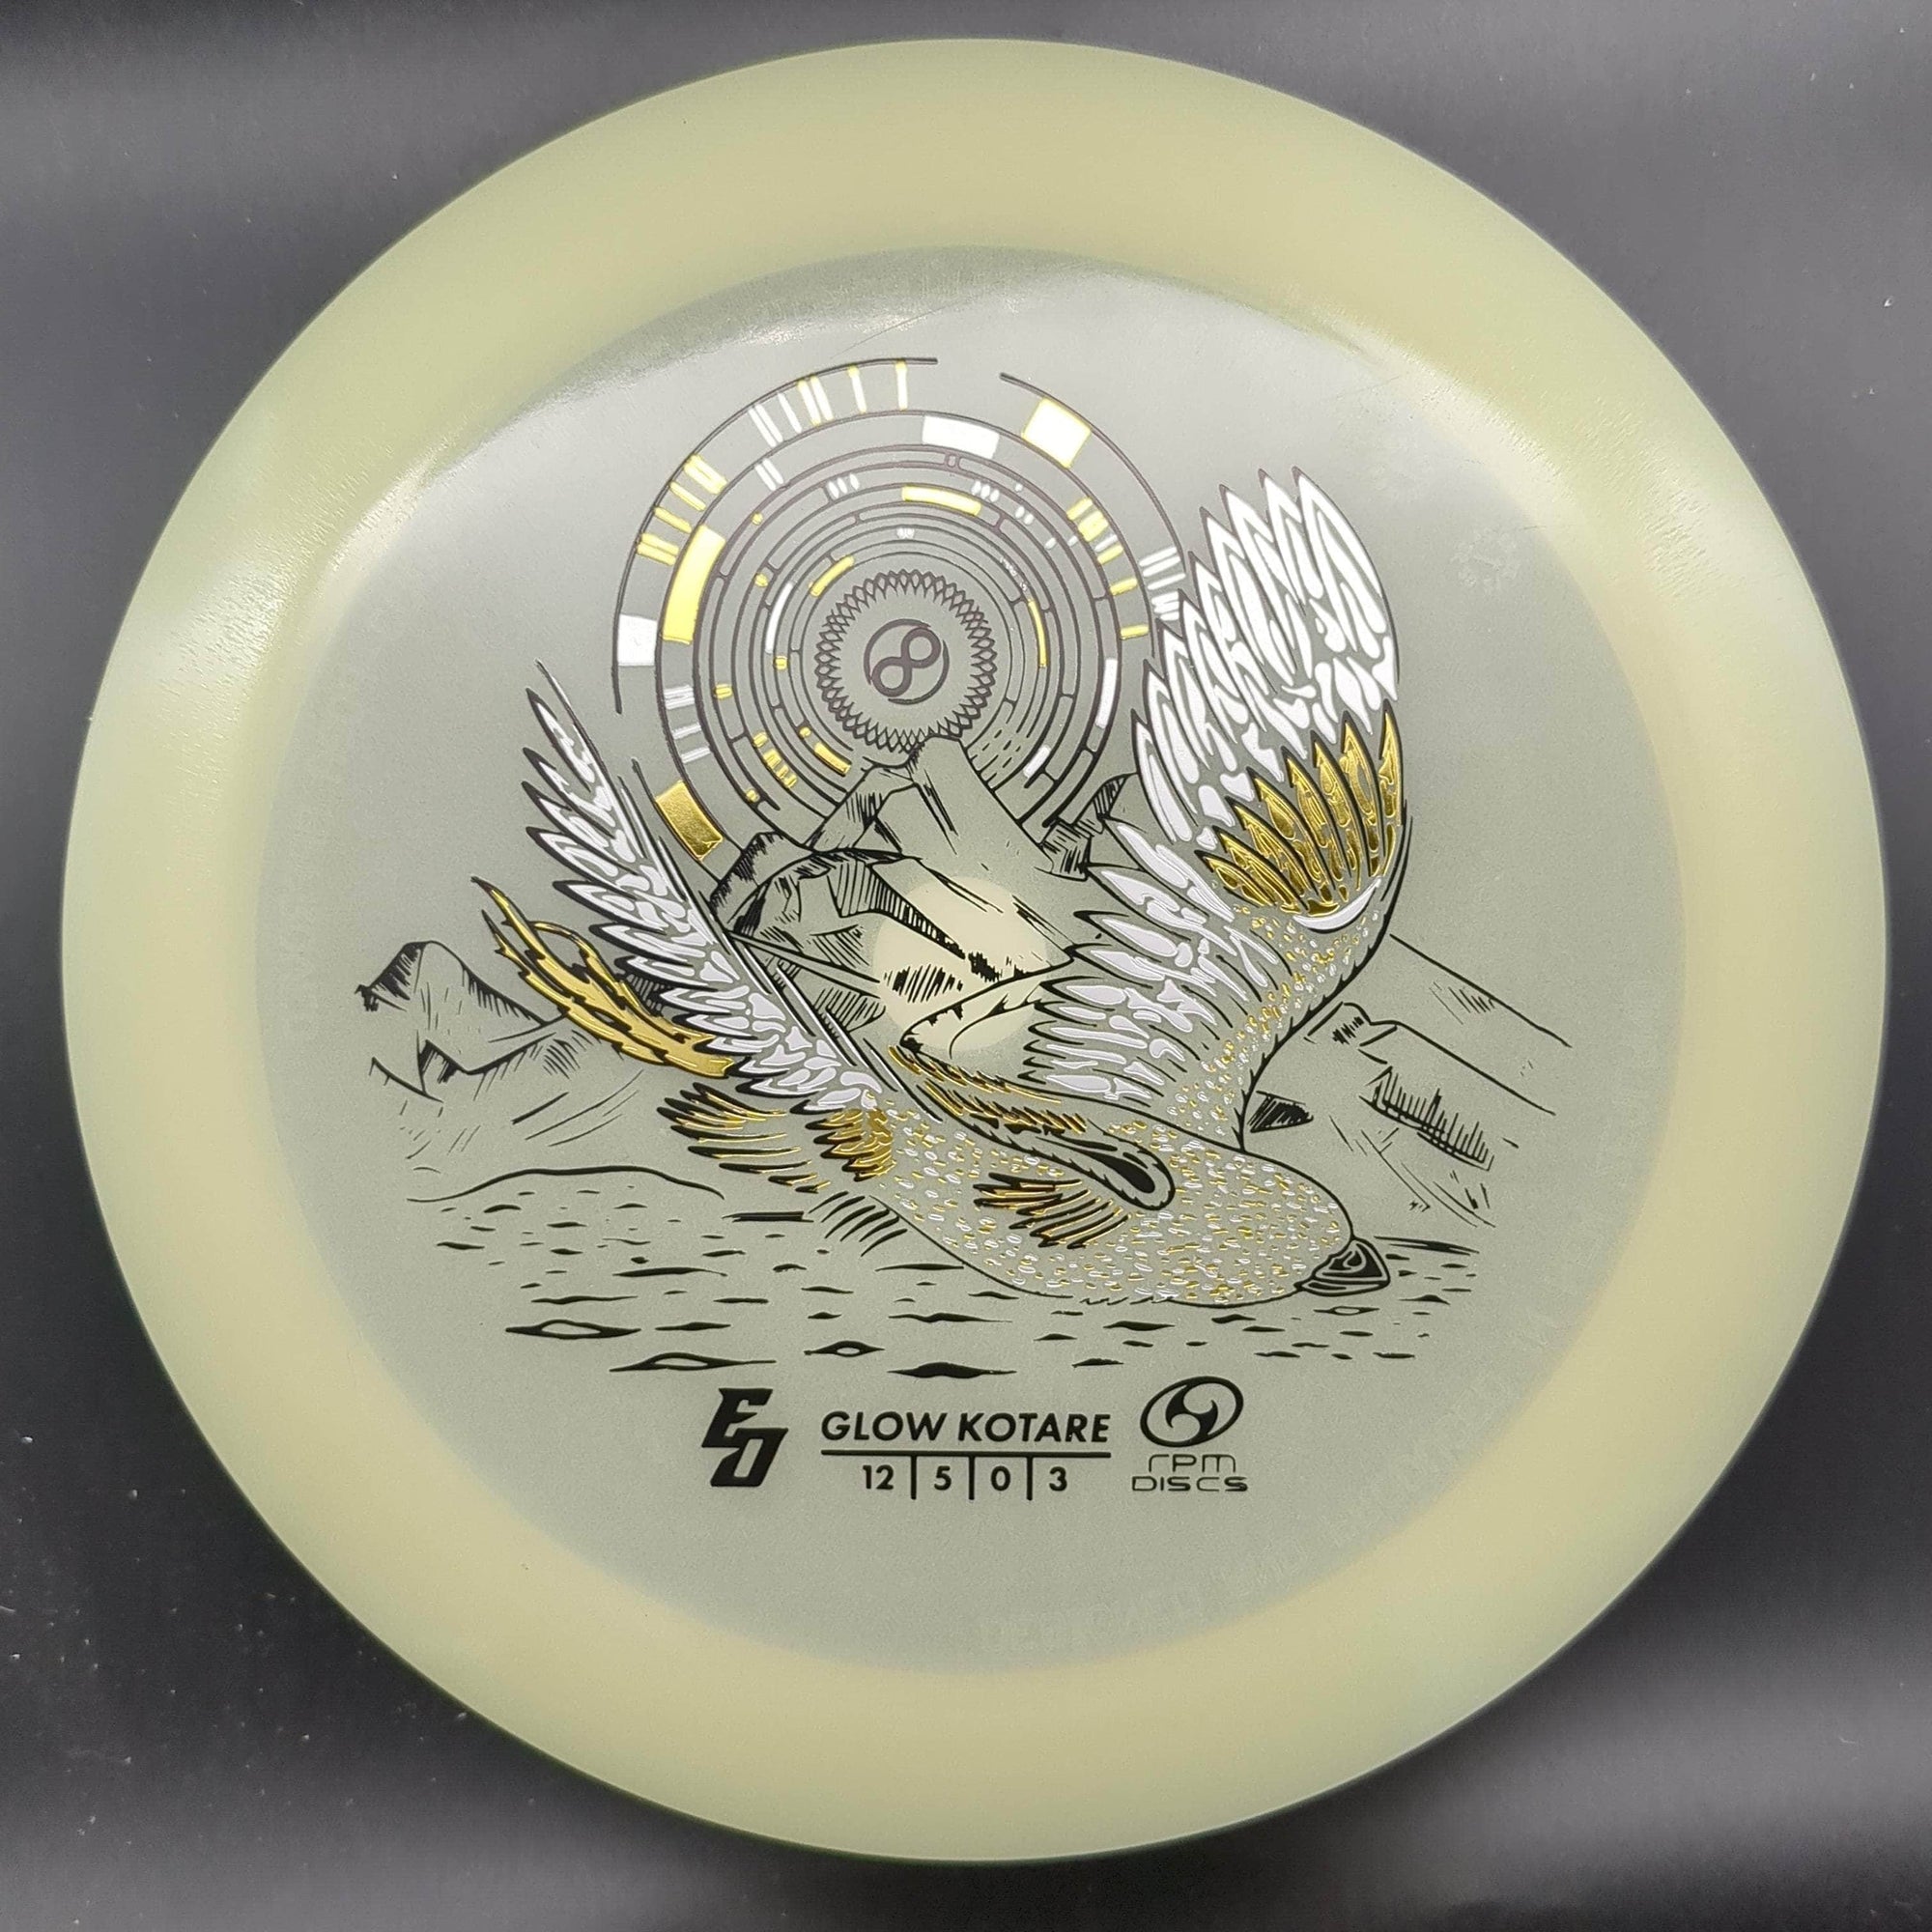 RPM Discs Distance Driver Gold/Silver Stamp 174g Kotare, Atomic Glow, Eric Oakley Edition